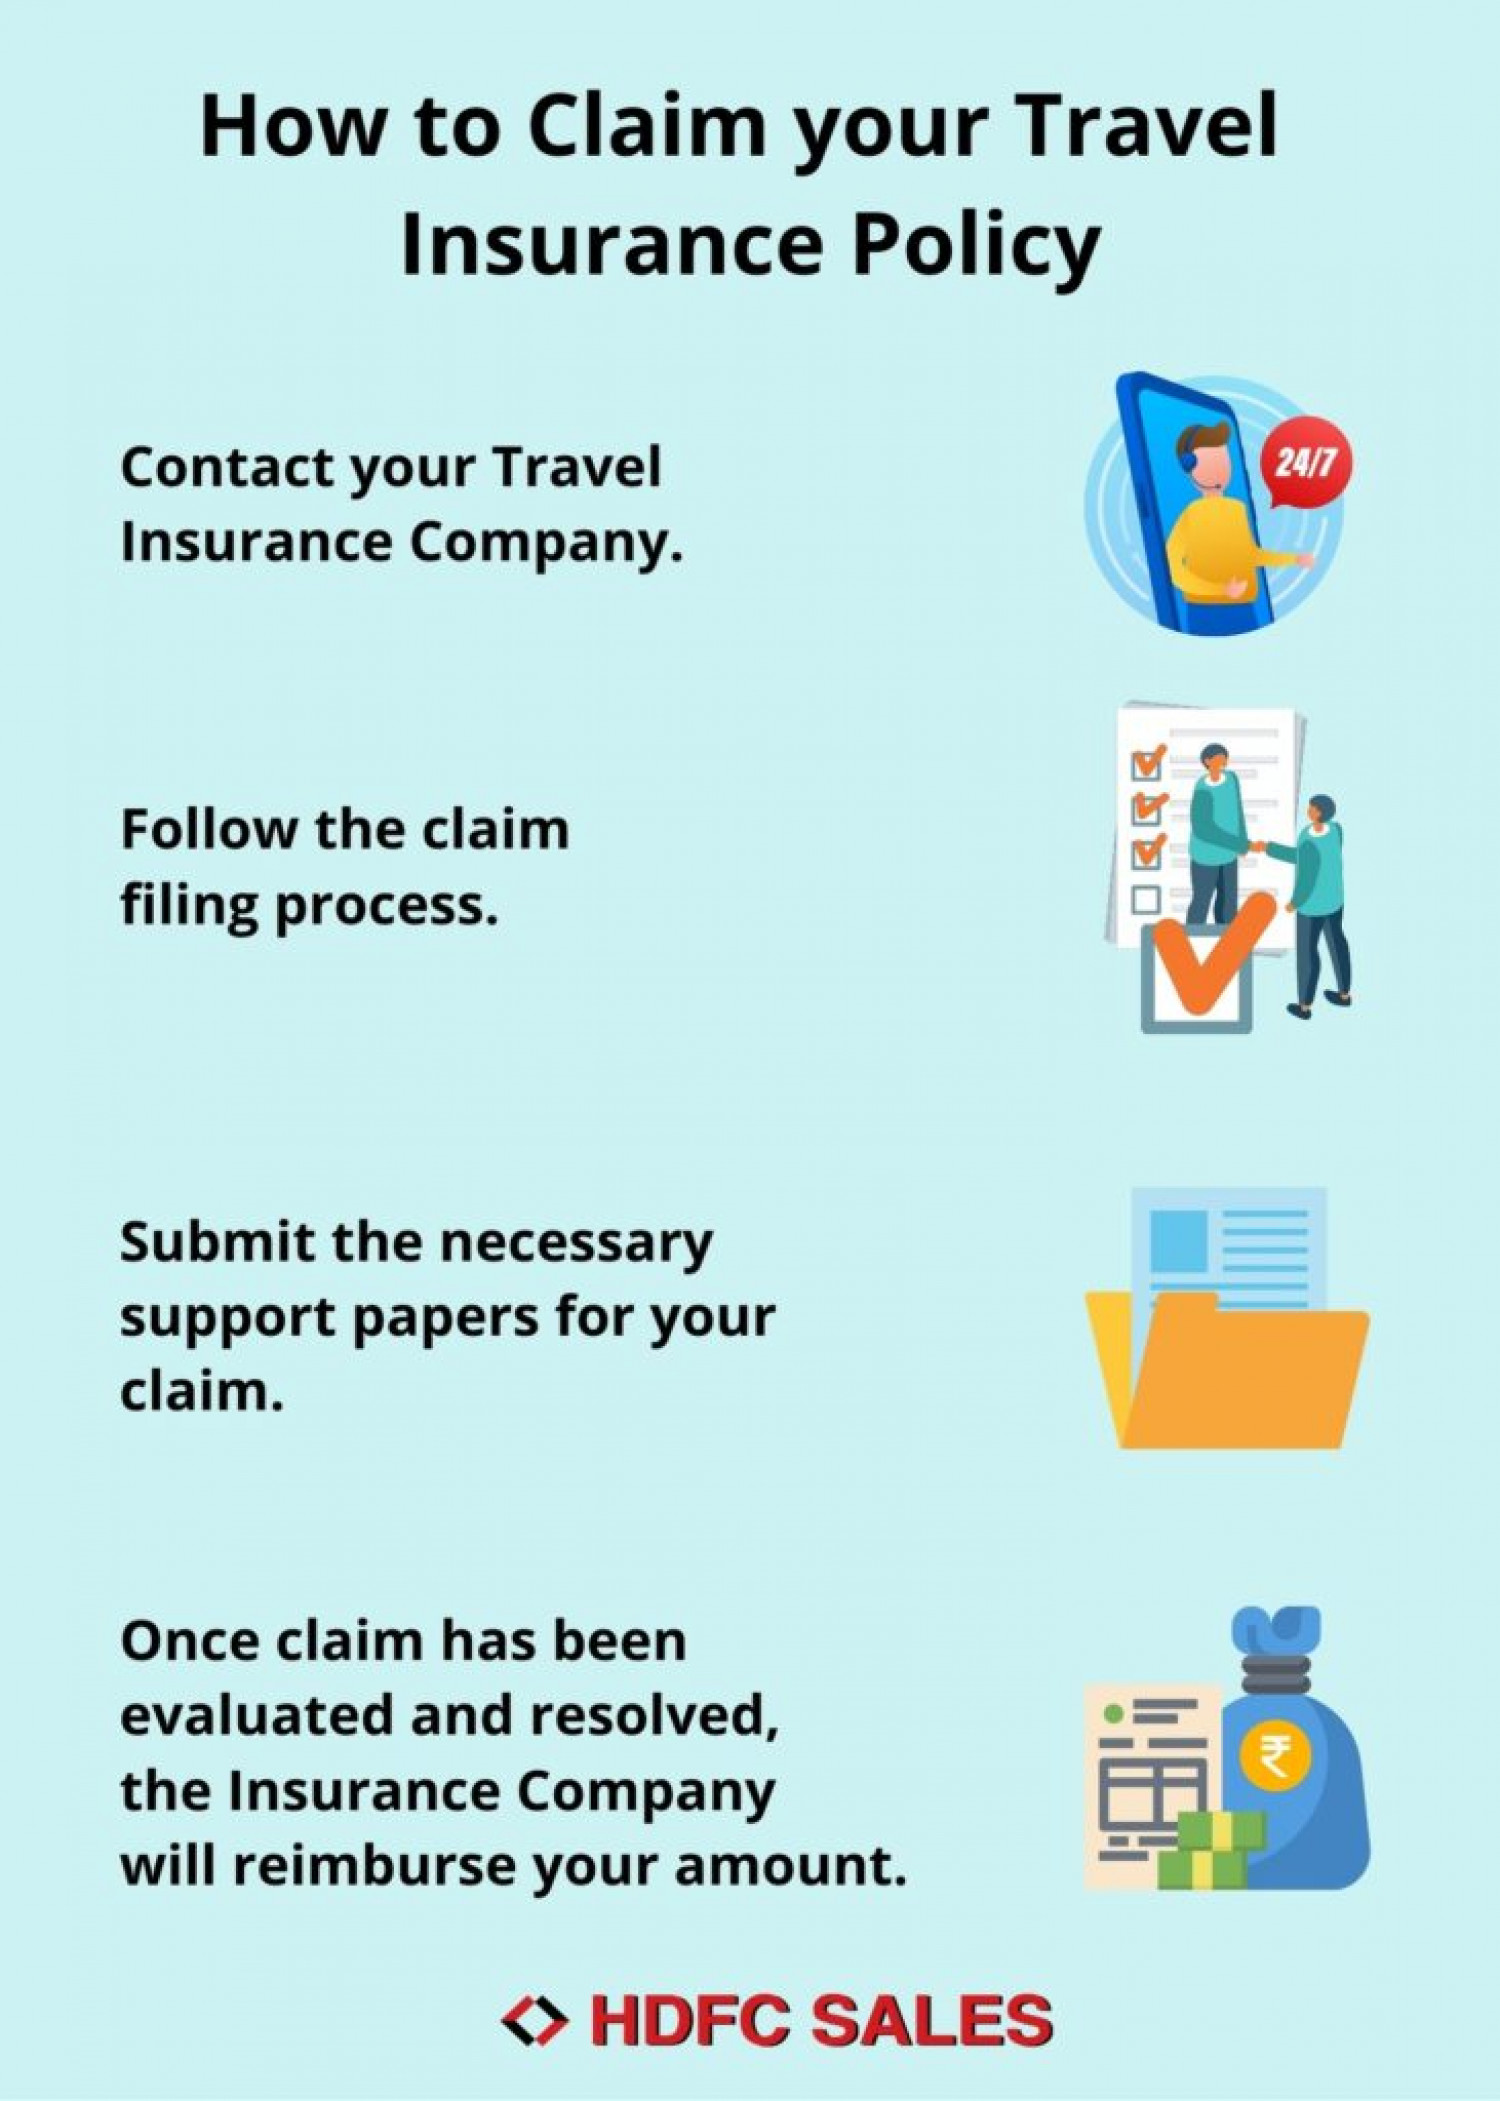 How to claim your Travel Insurance Policy Infographic